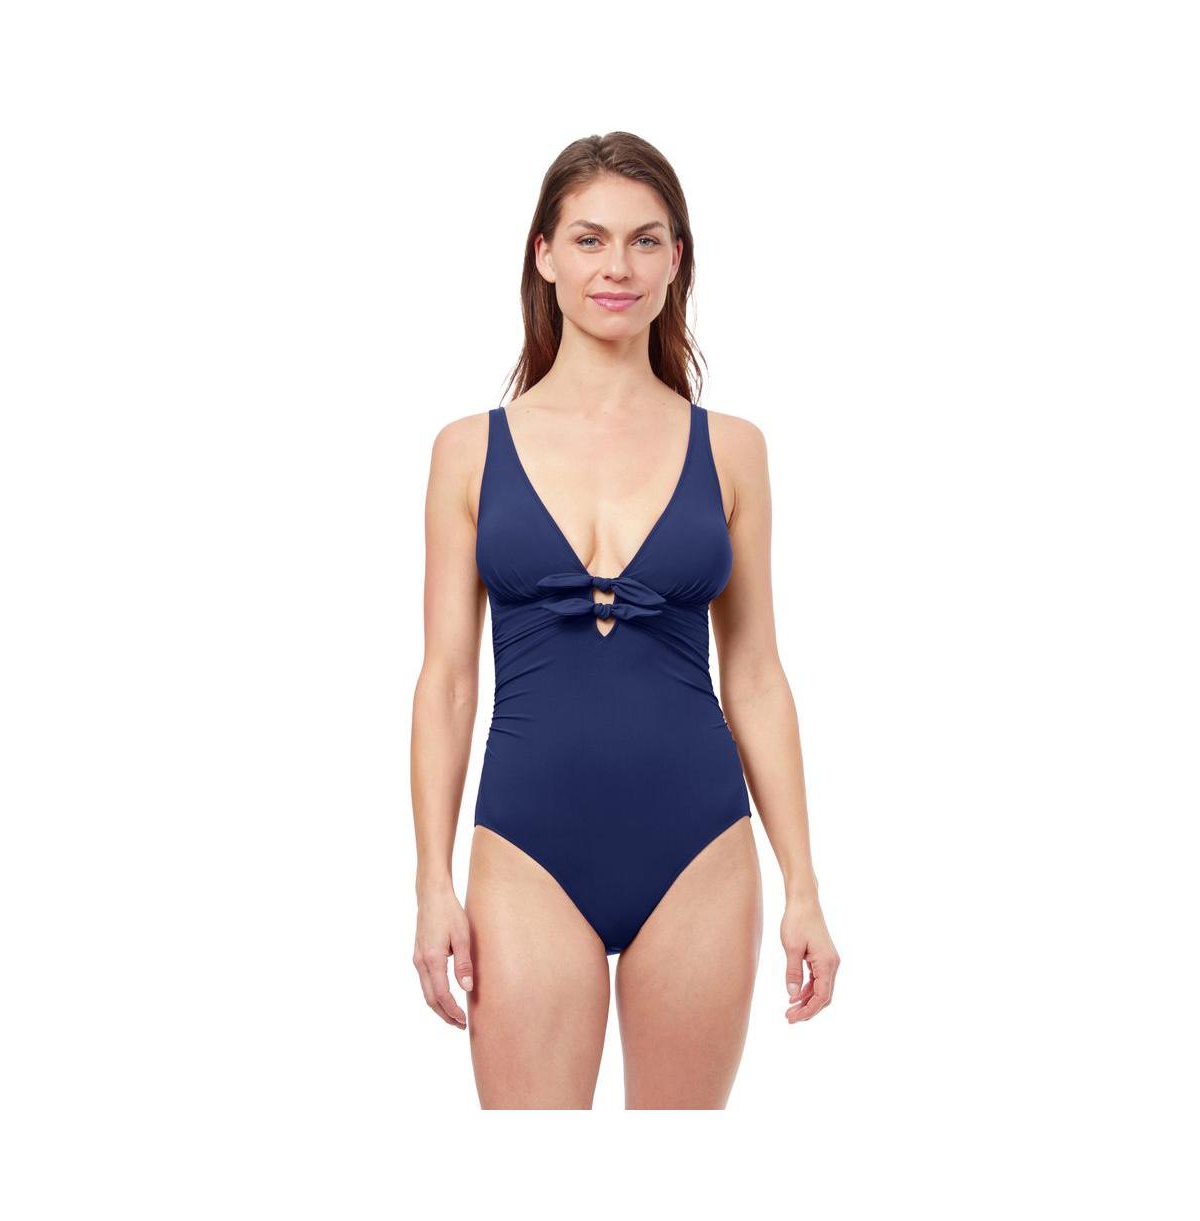 Dandy Bow Tie Deep V Neck one piece swimsuit - Navy